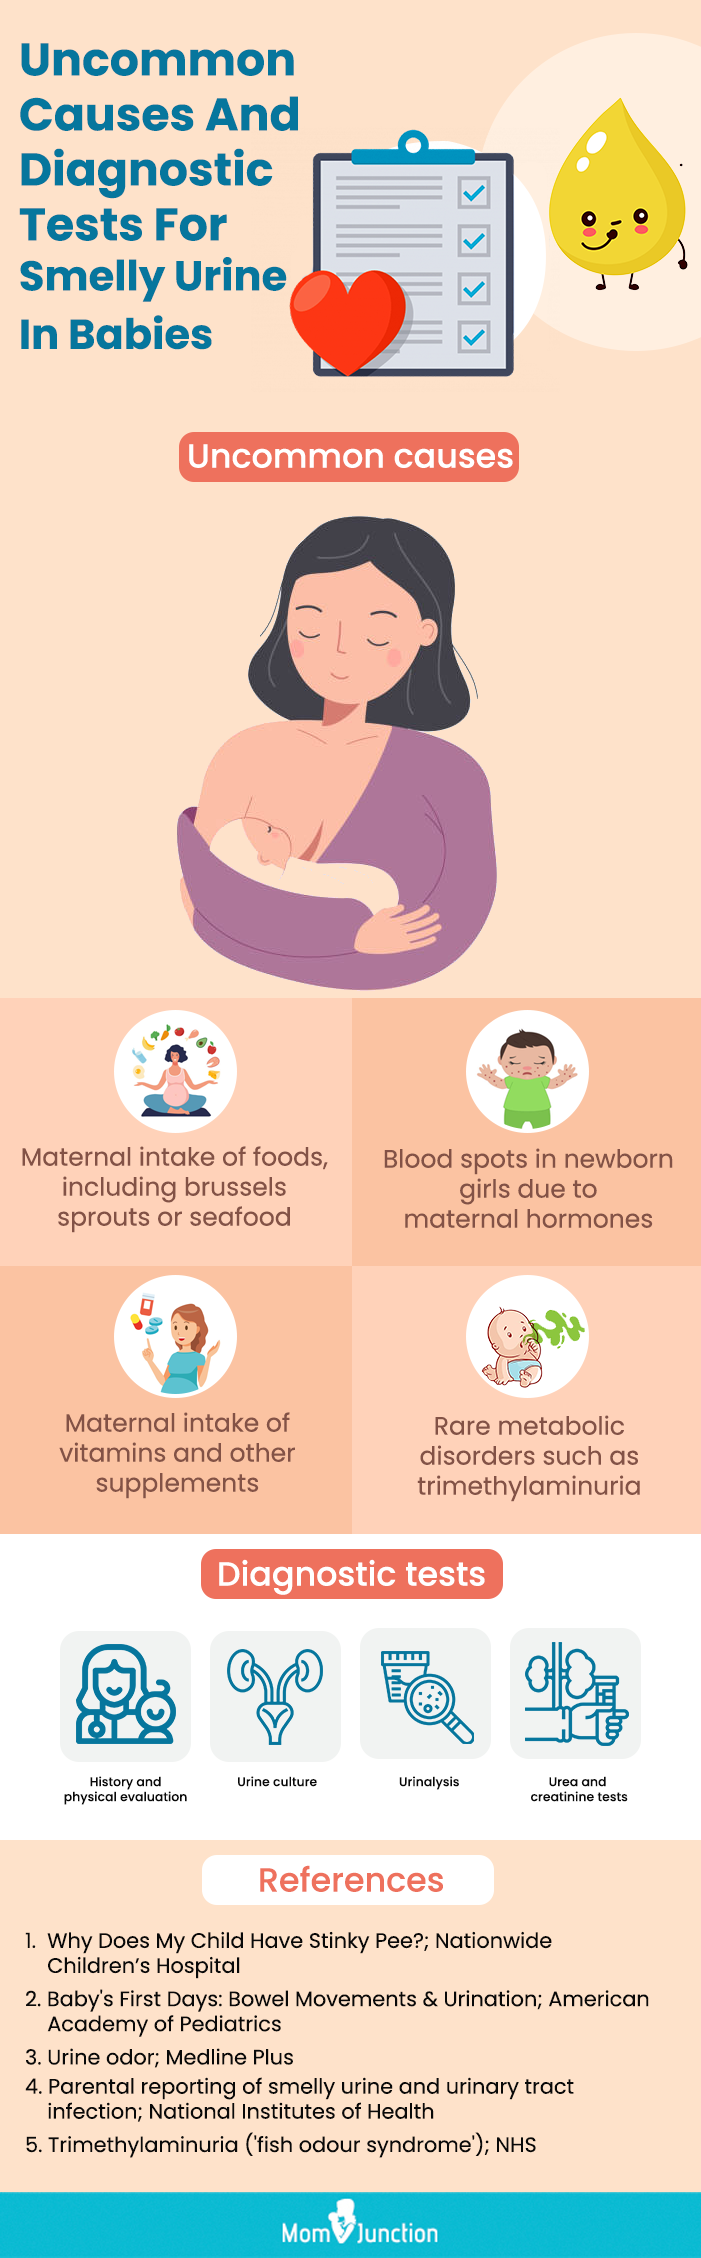 causes and diagnostic tests for babys smelly urine (infographic)